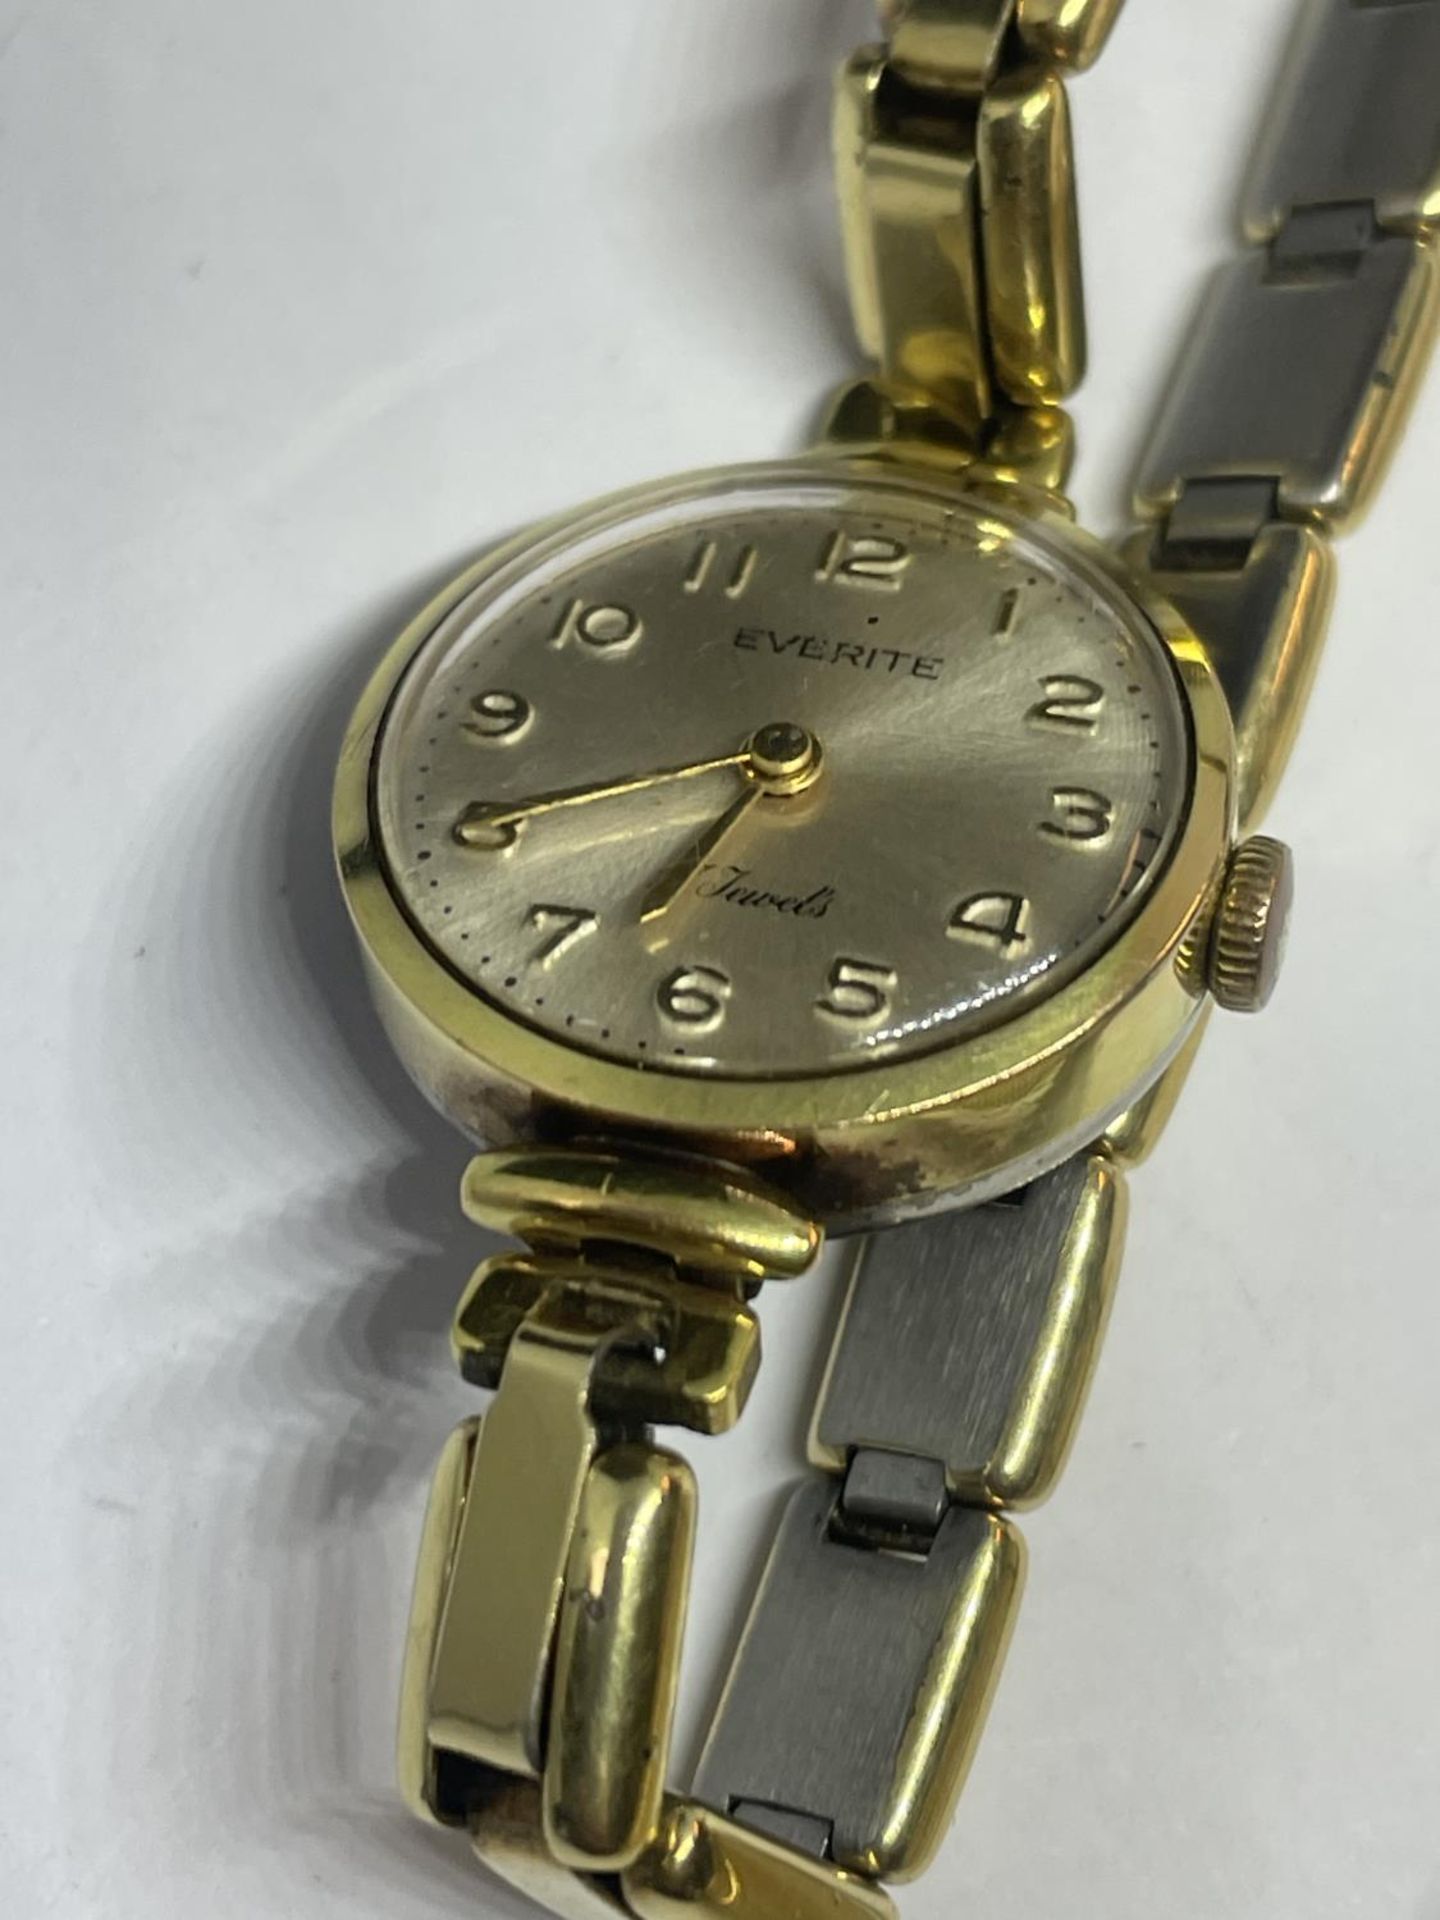 THREE WRIST WATCHES SEEN WORKING BUT NO WARRANTY - Image 3 of 4